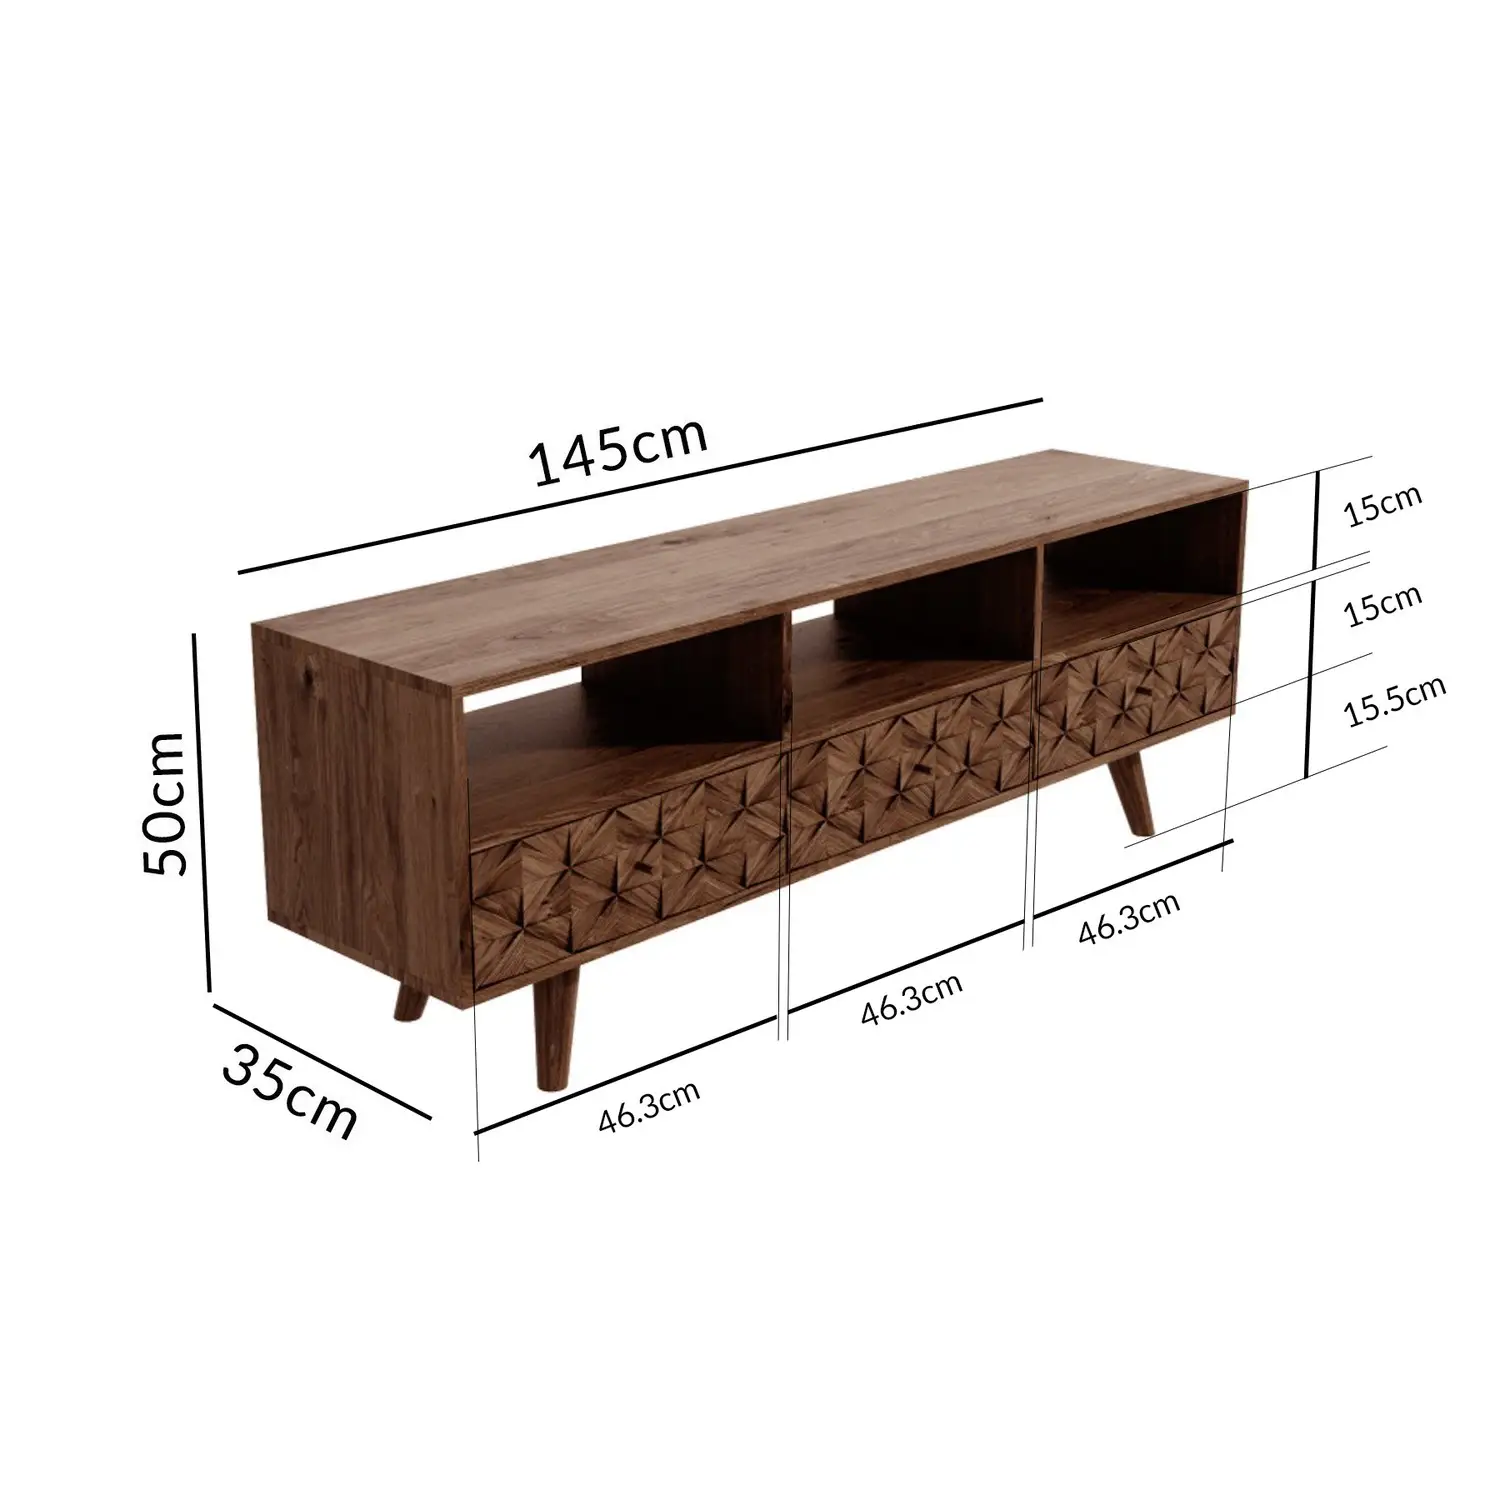 TV table size